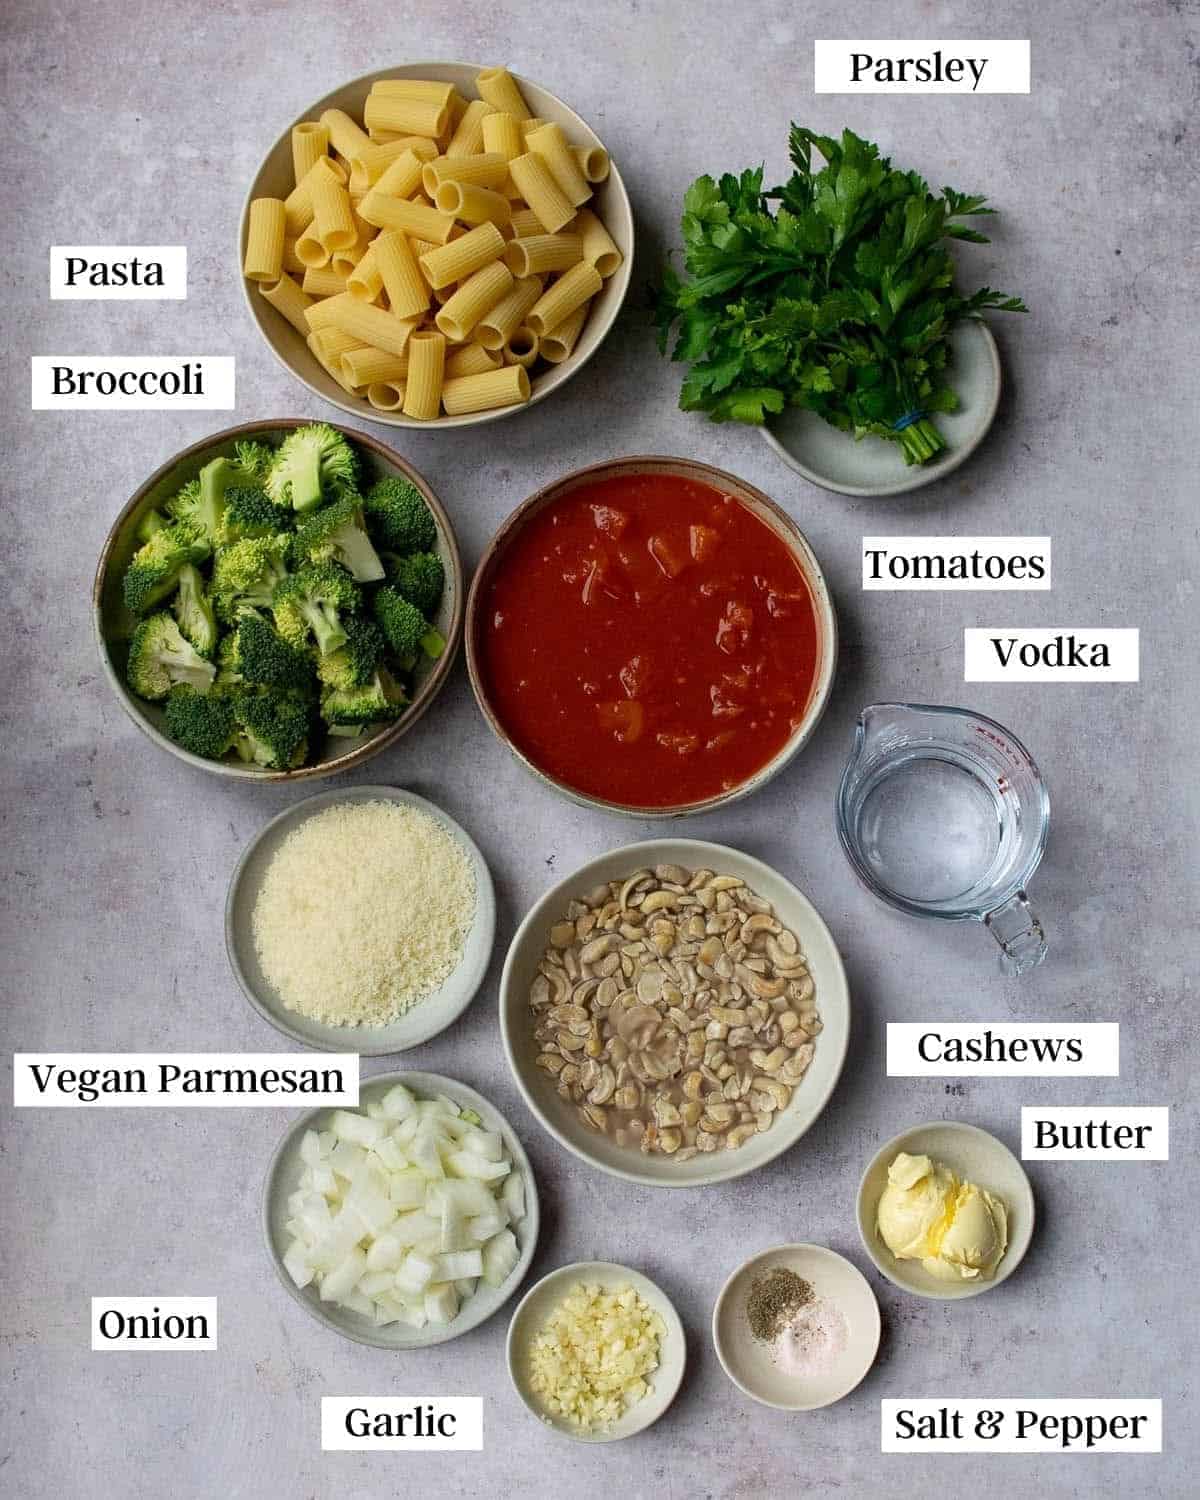 Ingredients in bowls, labelled with text